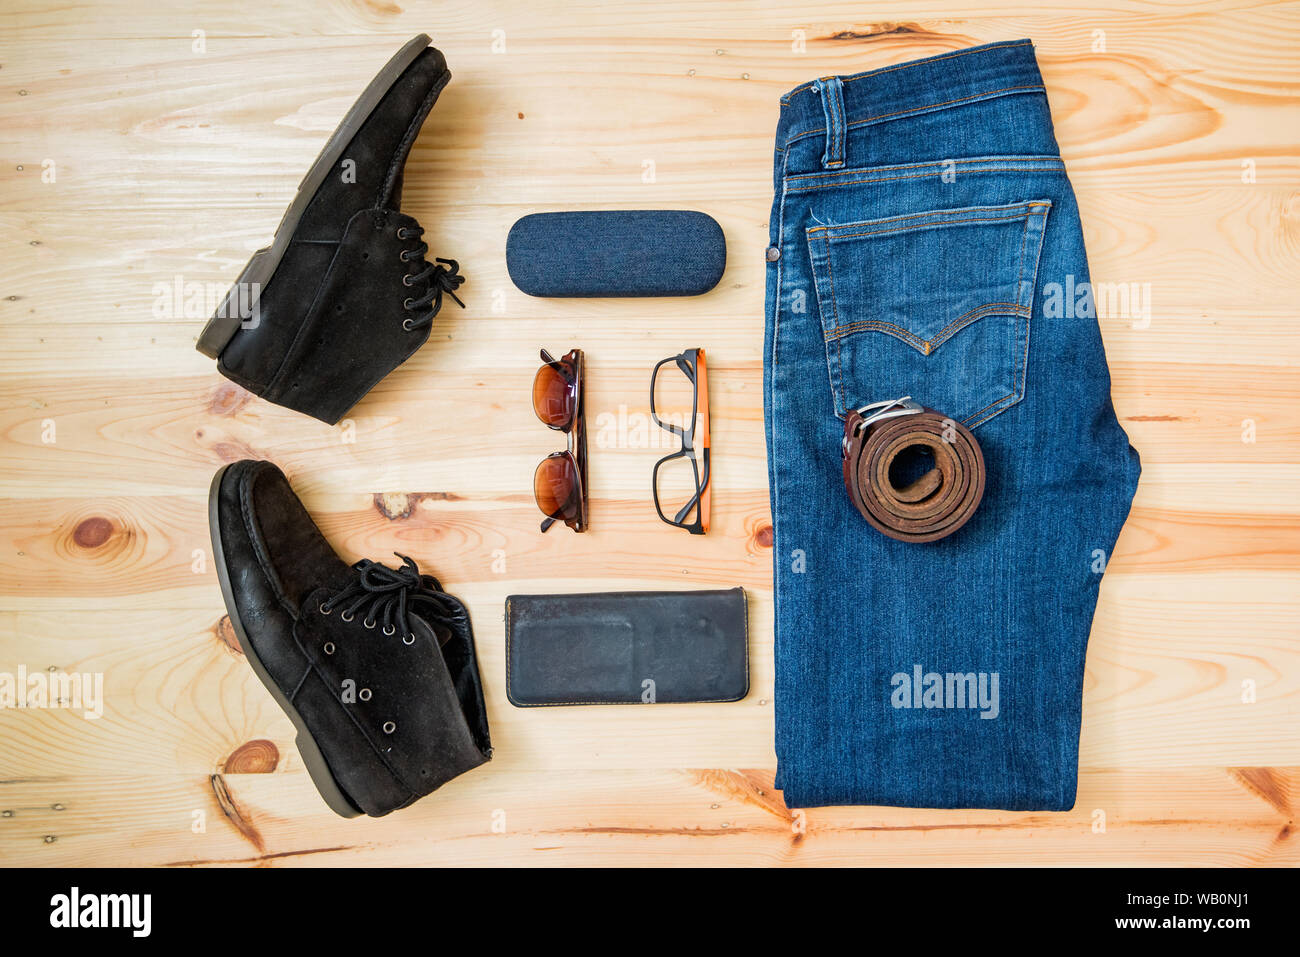 man casual outfits fashion accessories wooden table, (shirt,jean,wallet,sunglasses,glasses,Belt,shoes) Stock Photo